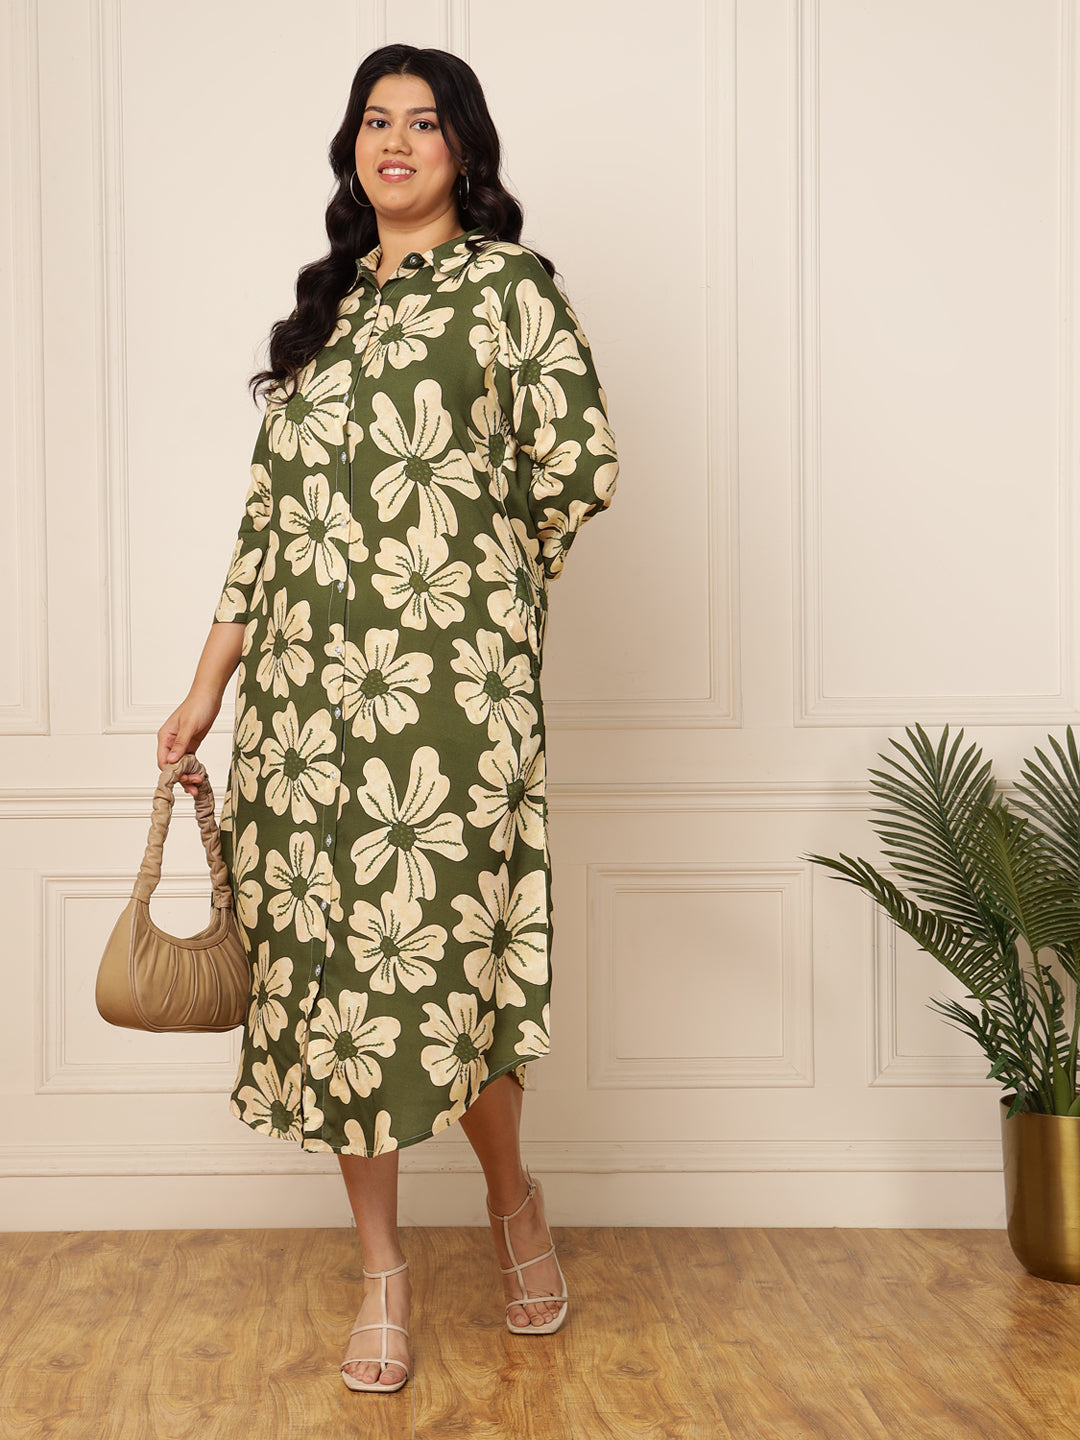 Women's Plus Size Olive Green Floral Printed Shirt Dress